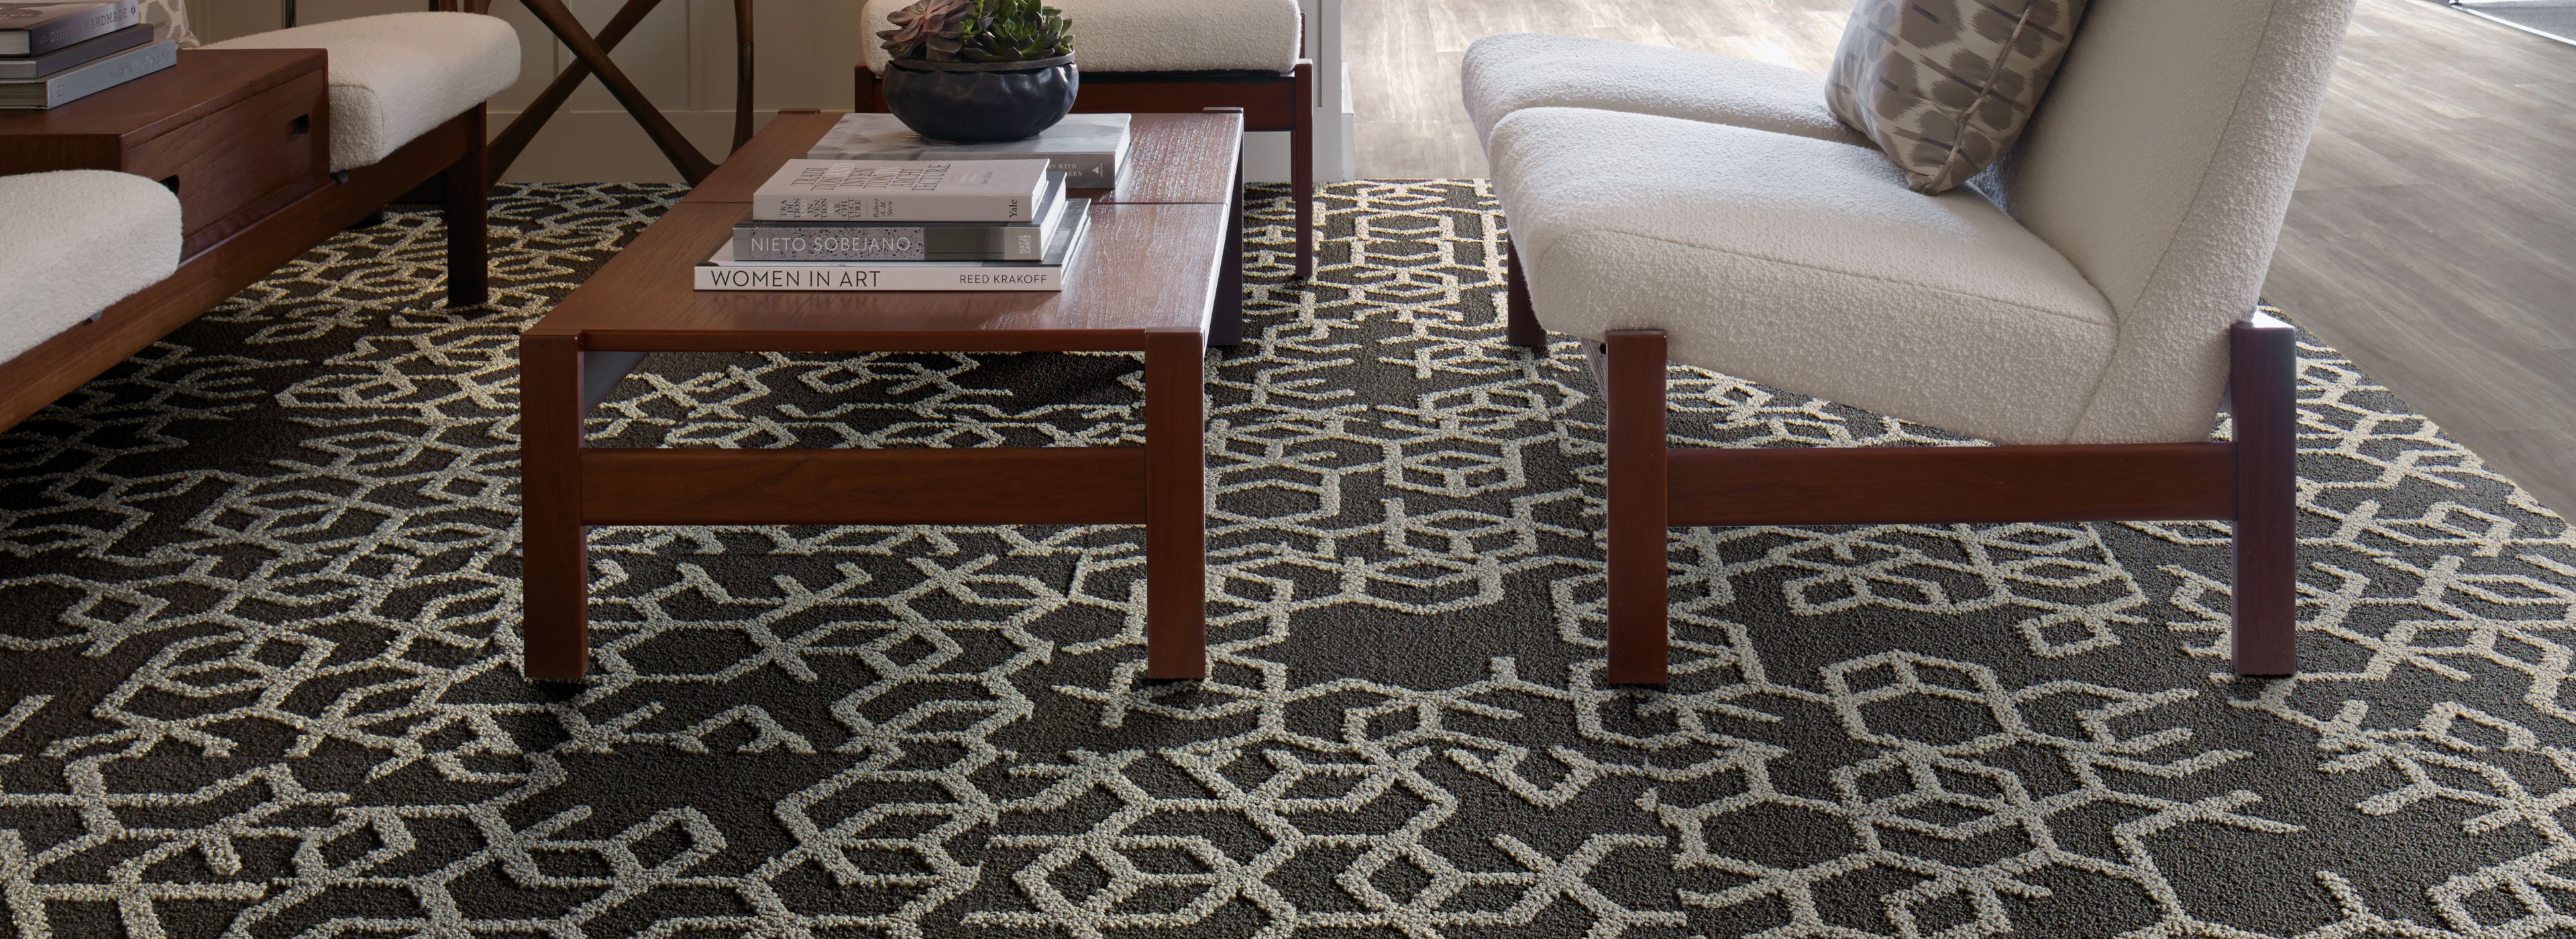 Interface Bee's Knees carpet tile and LVT in seating area imagen número 1